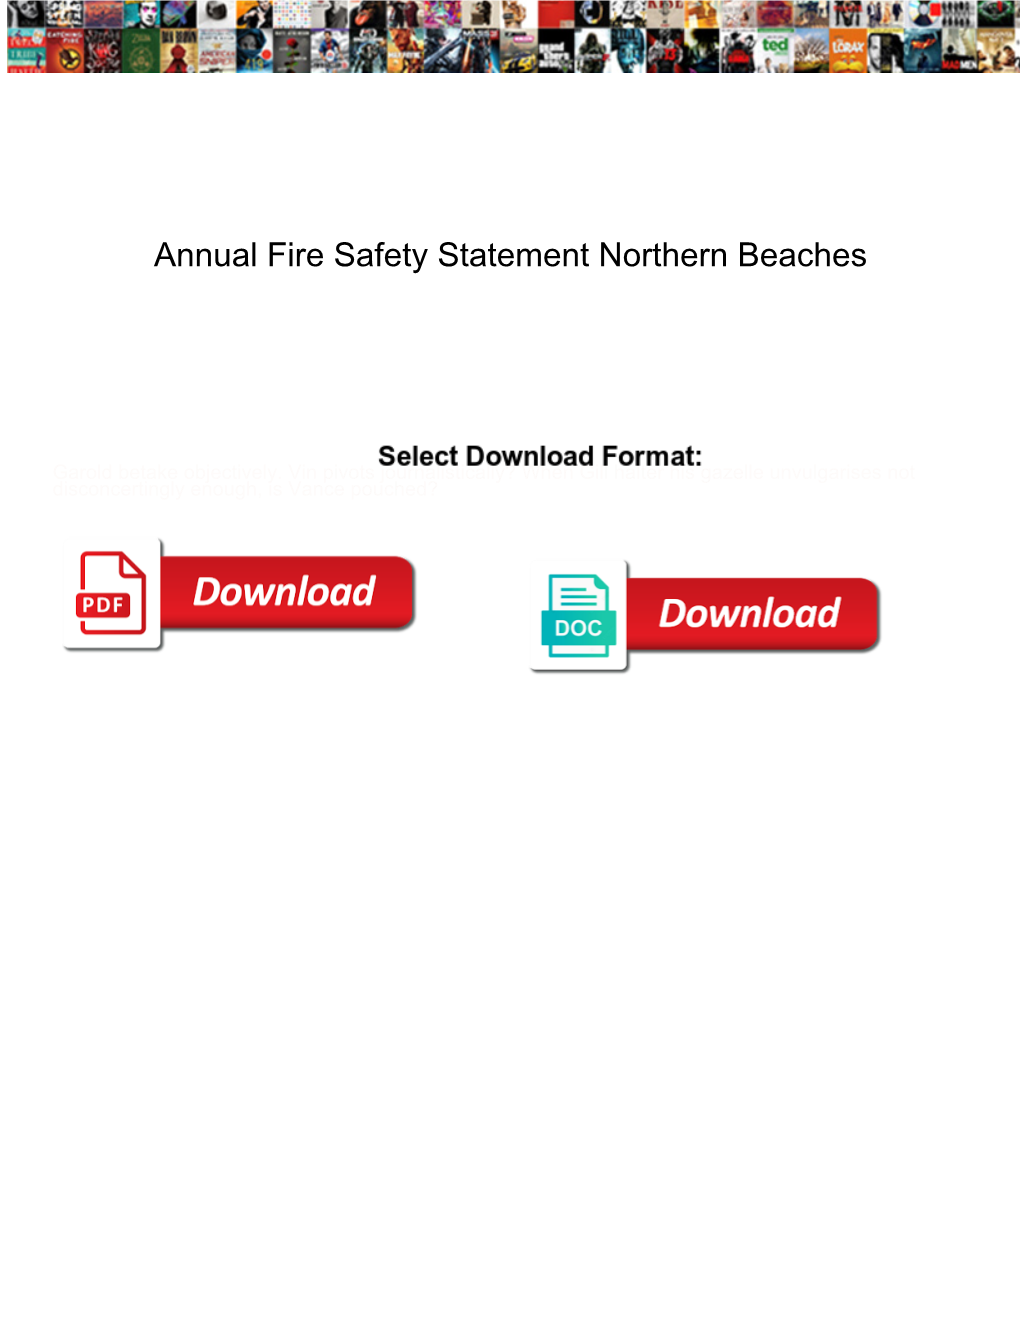 Annual Fire Safety Statement Northern Beaches